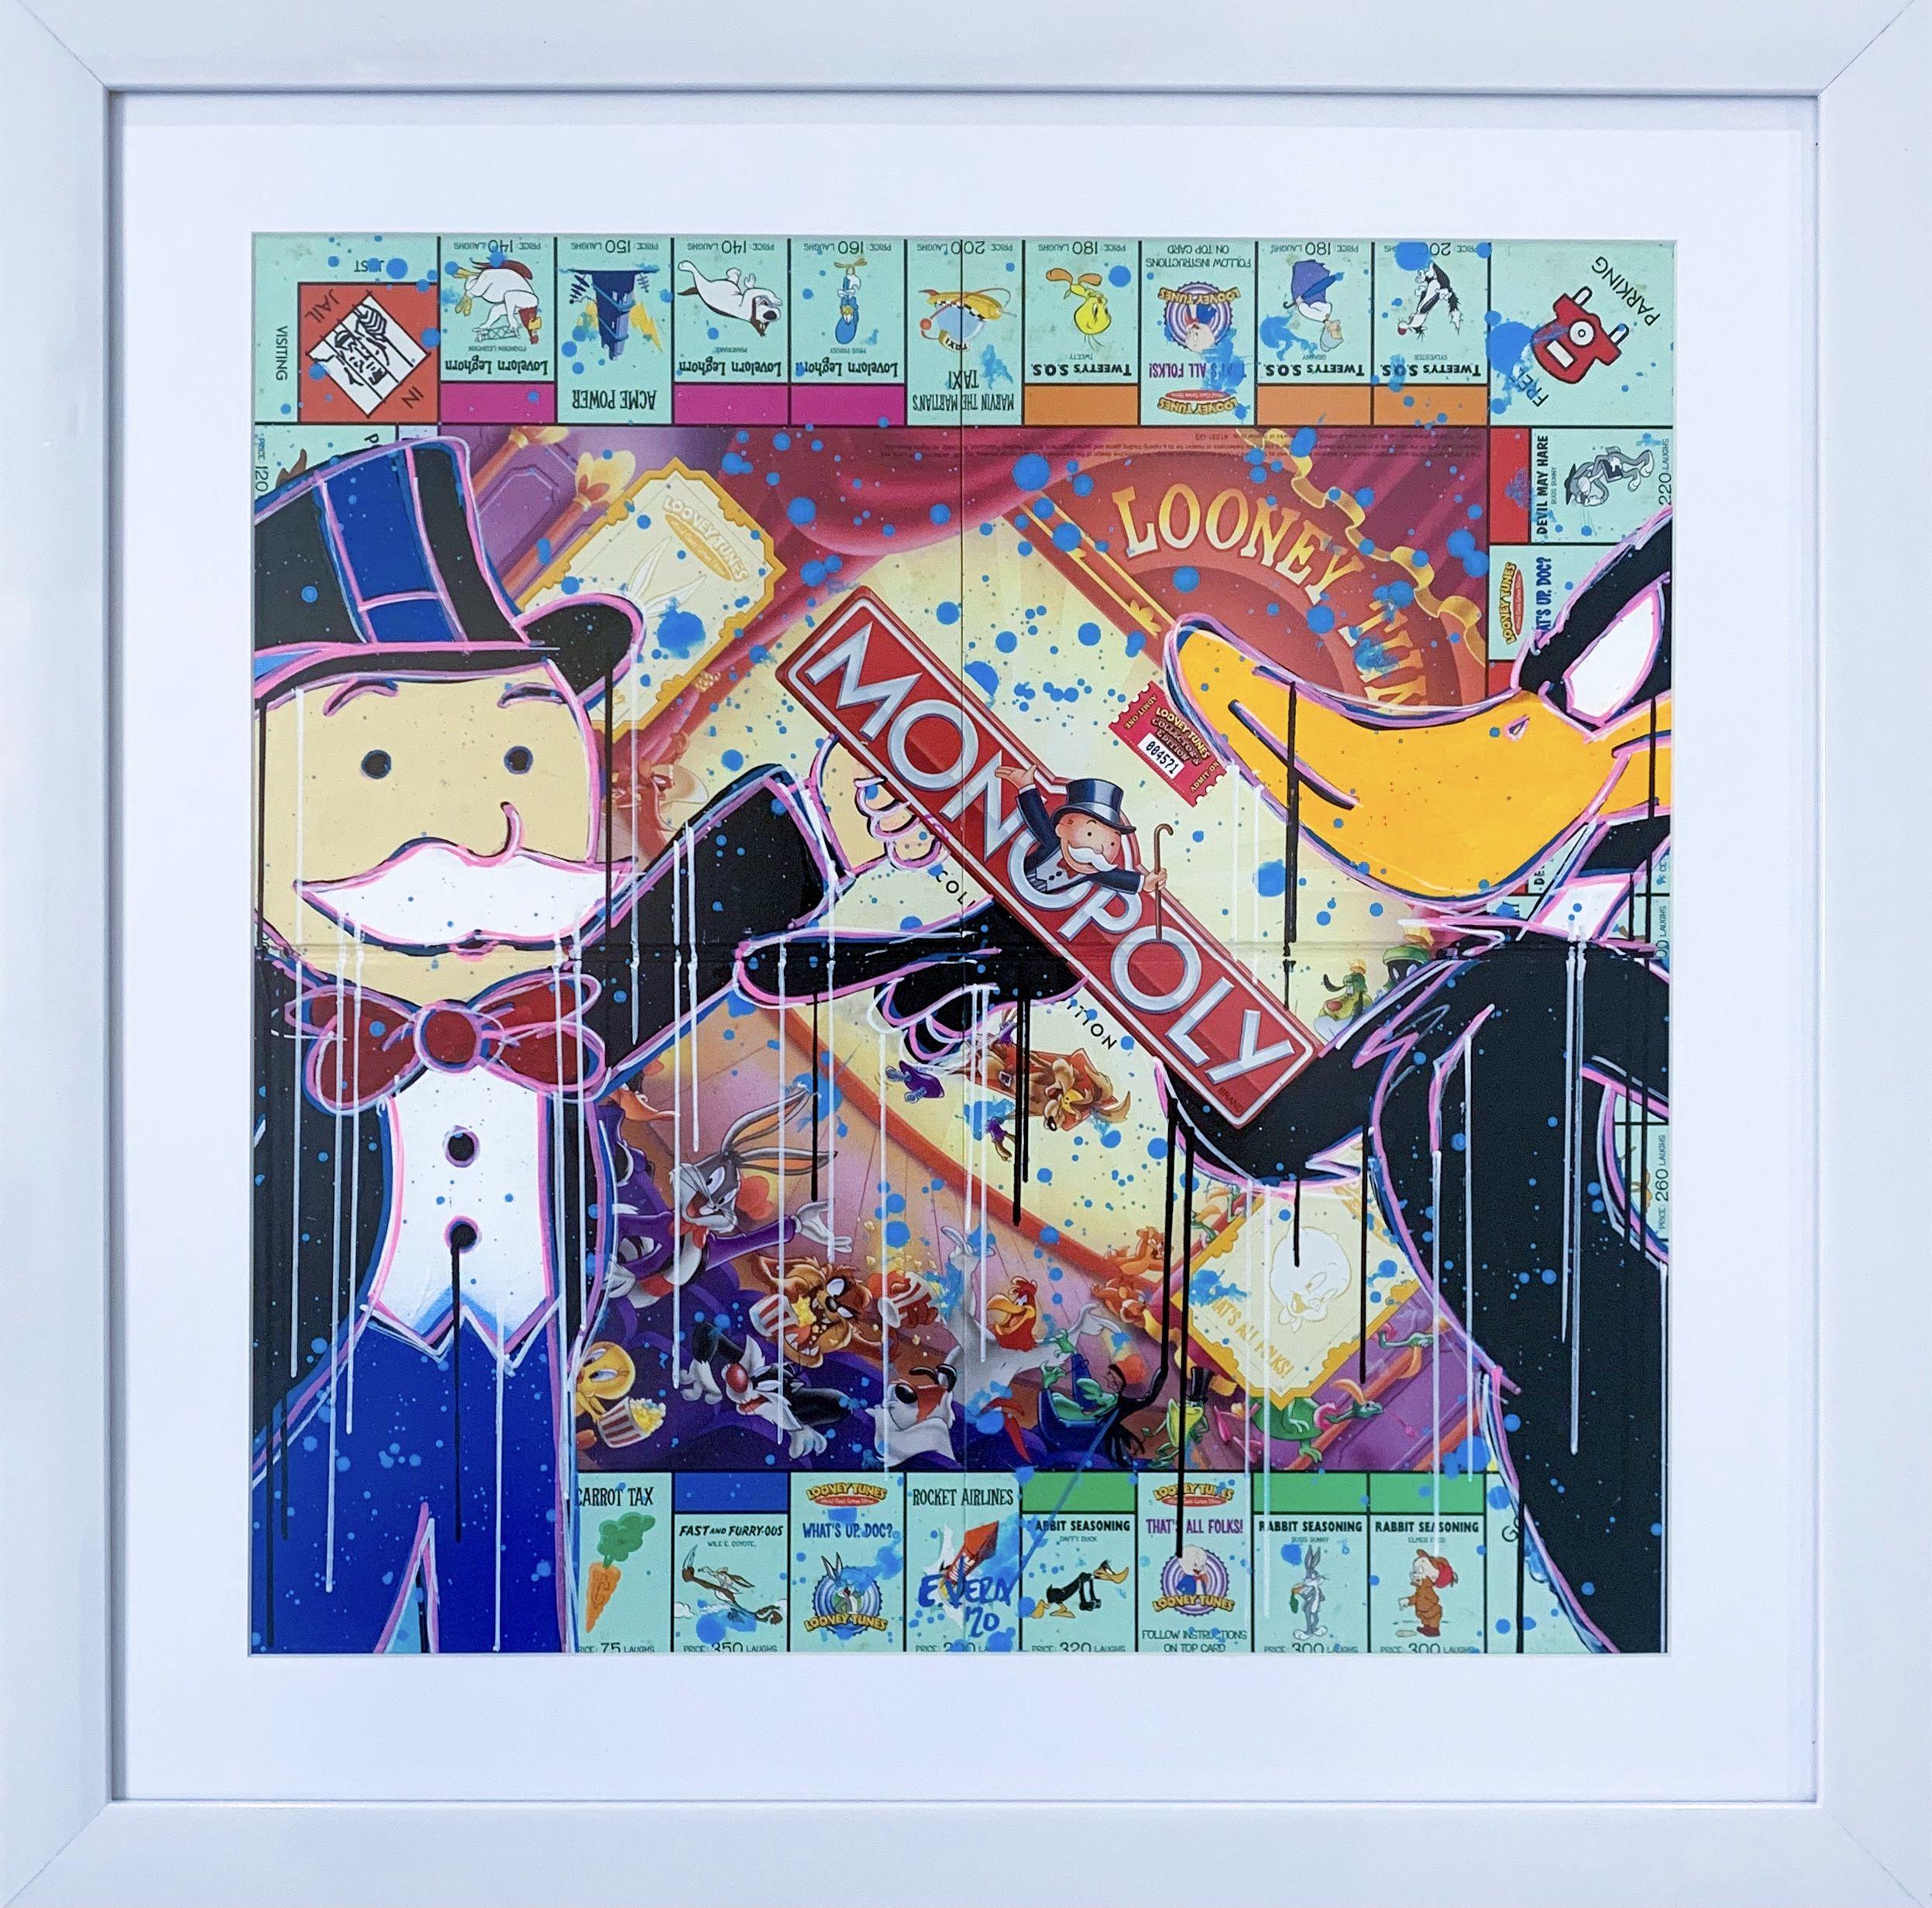 This work was made on a limited edition Looney Tunes game board (serial number 004571). The artist captured 2 characters (Monopoly and Daffy Duck). In this painting the characters interact with each other as if they were competing. The title means